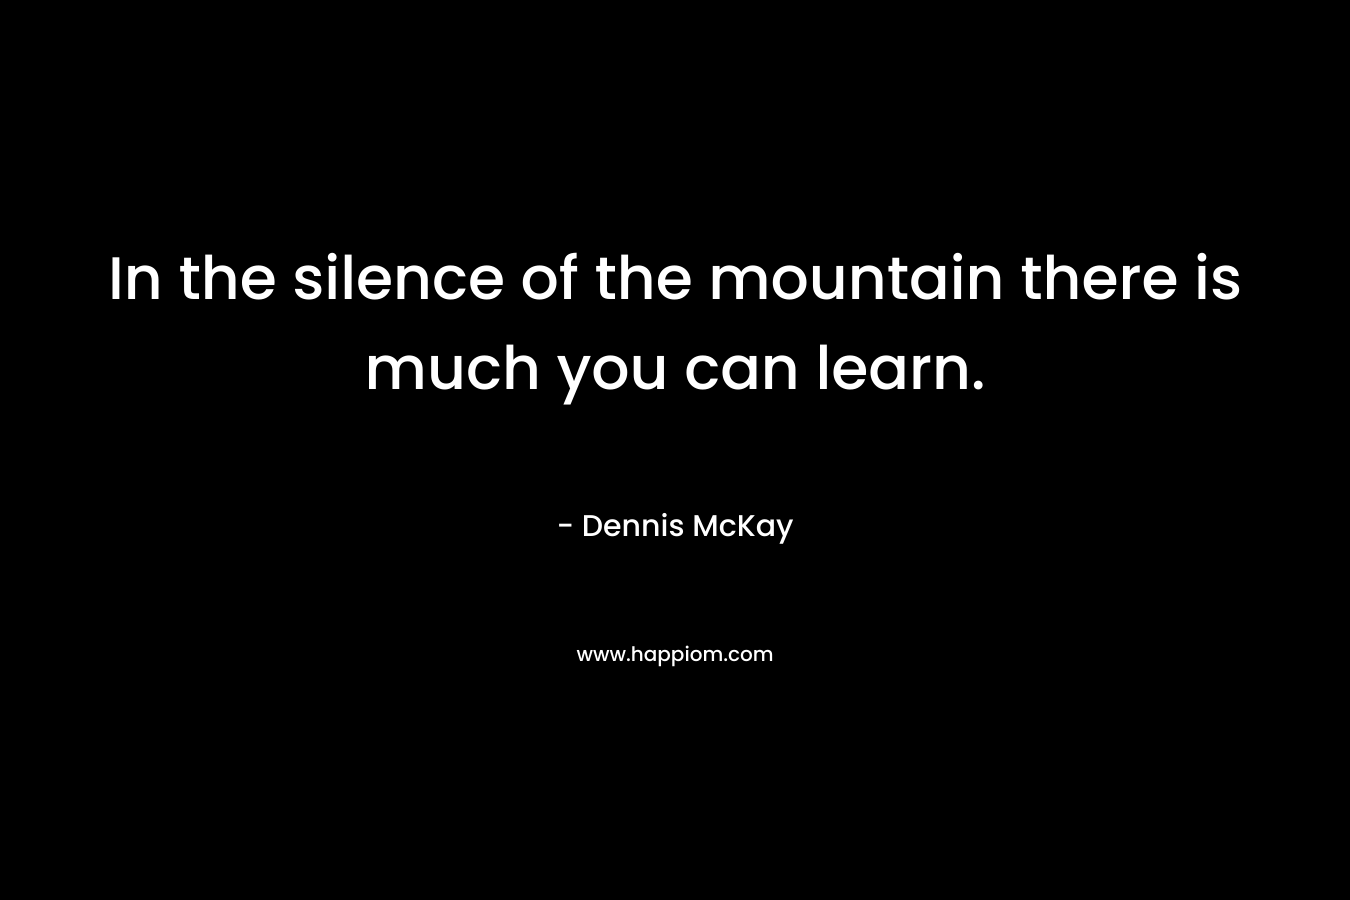 In the silence of the mountain there is much you can learn. – Dennis McKay